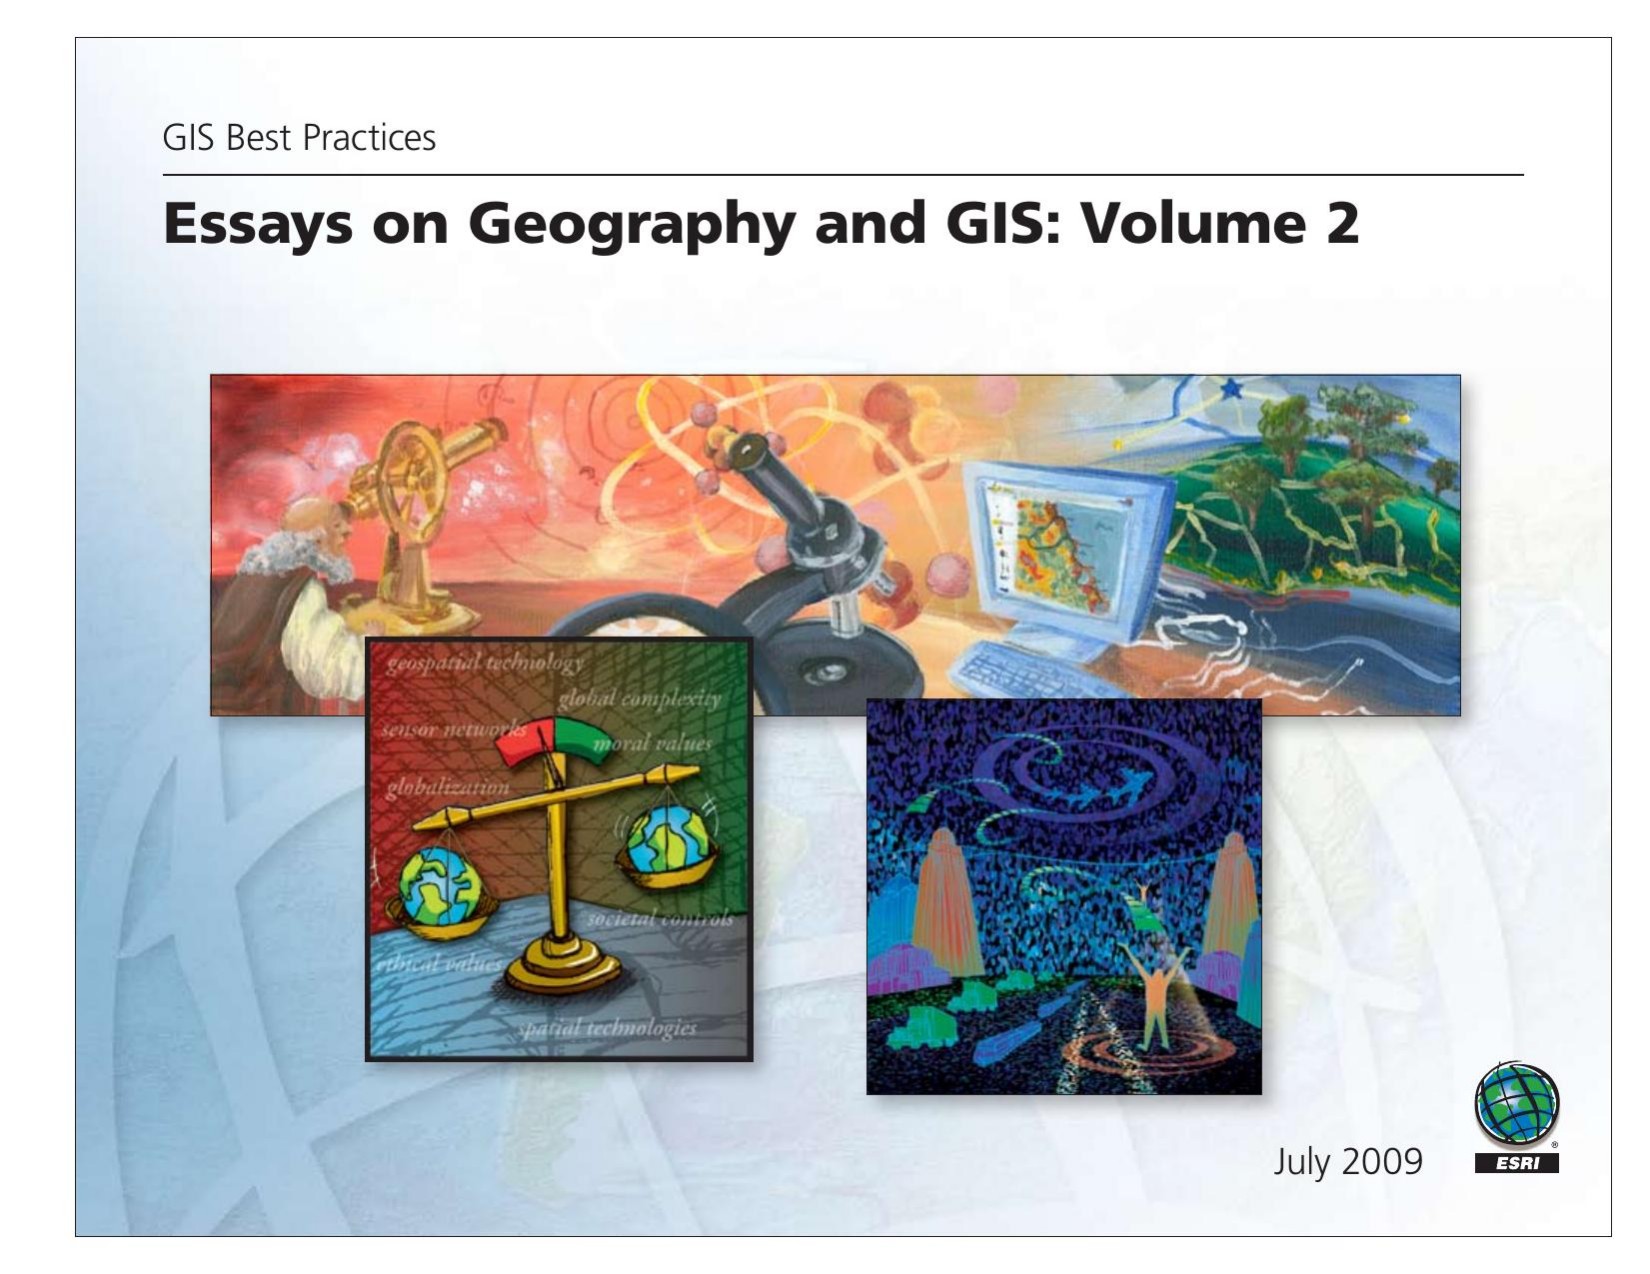 Essays on Geography and GIS Volume 2